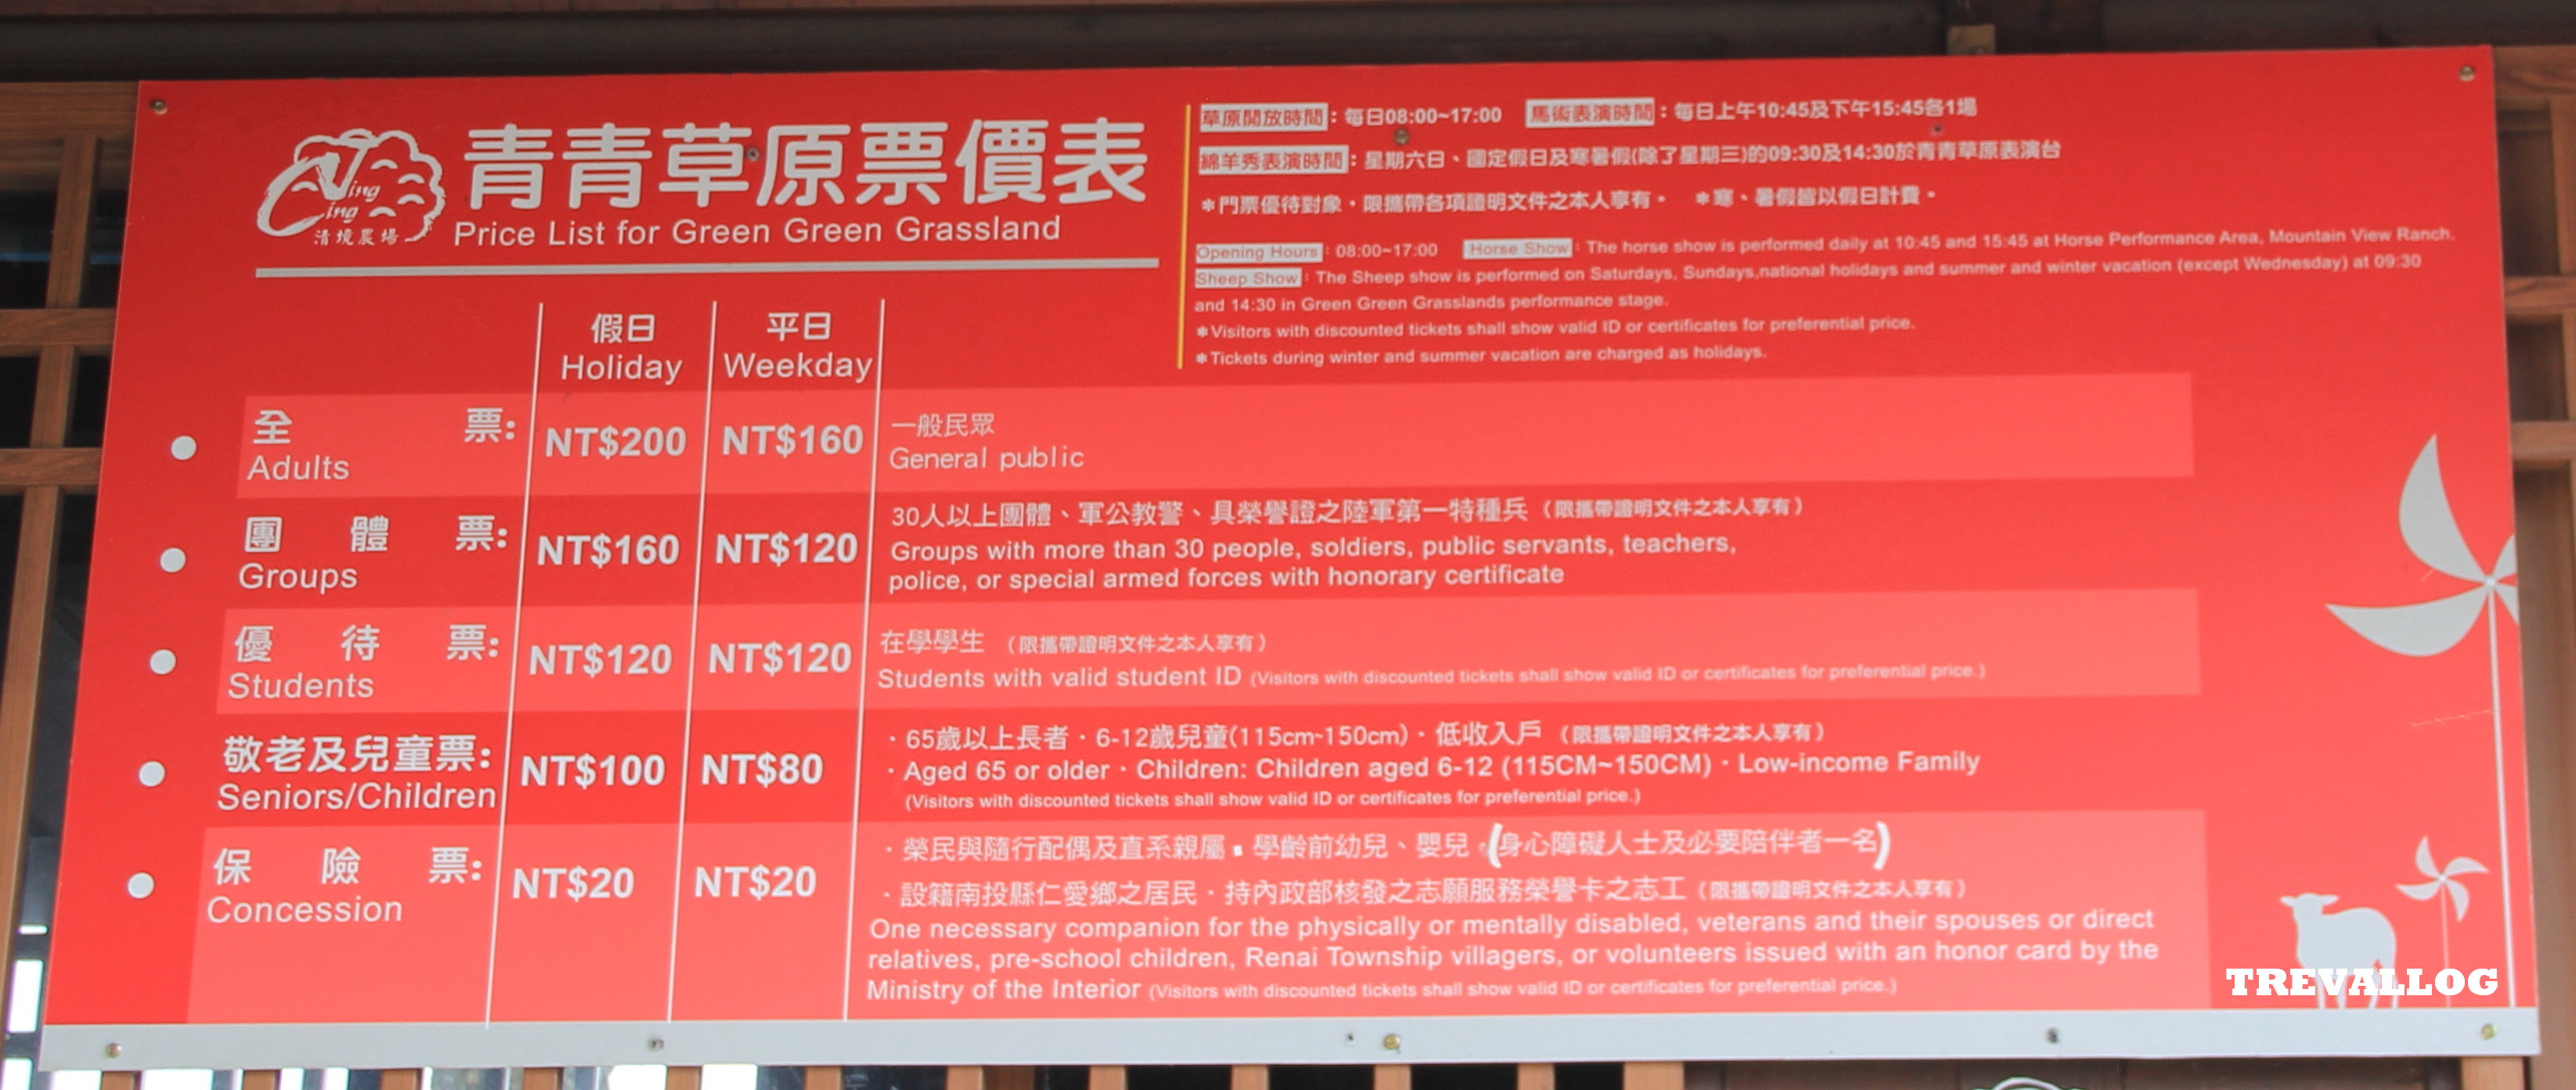 Entrance fees and information for Green Green Grassland (Cingjing Farm), Taiwan